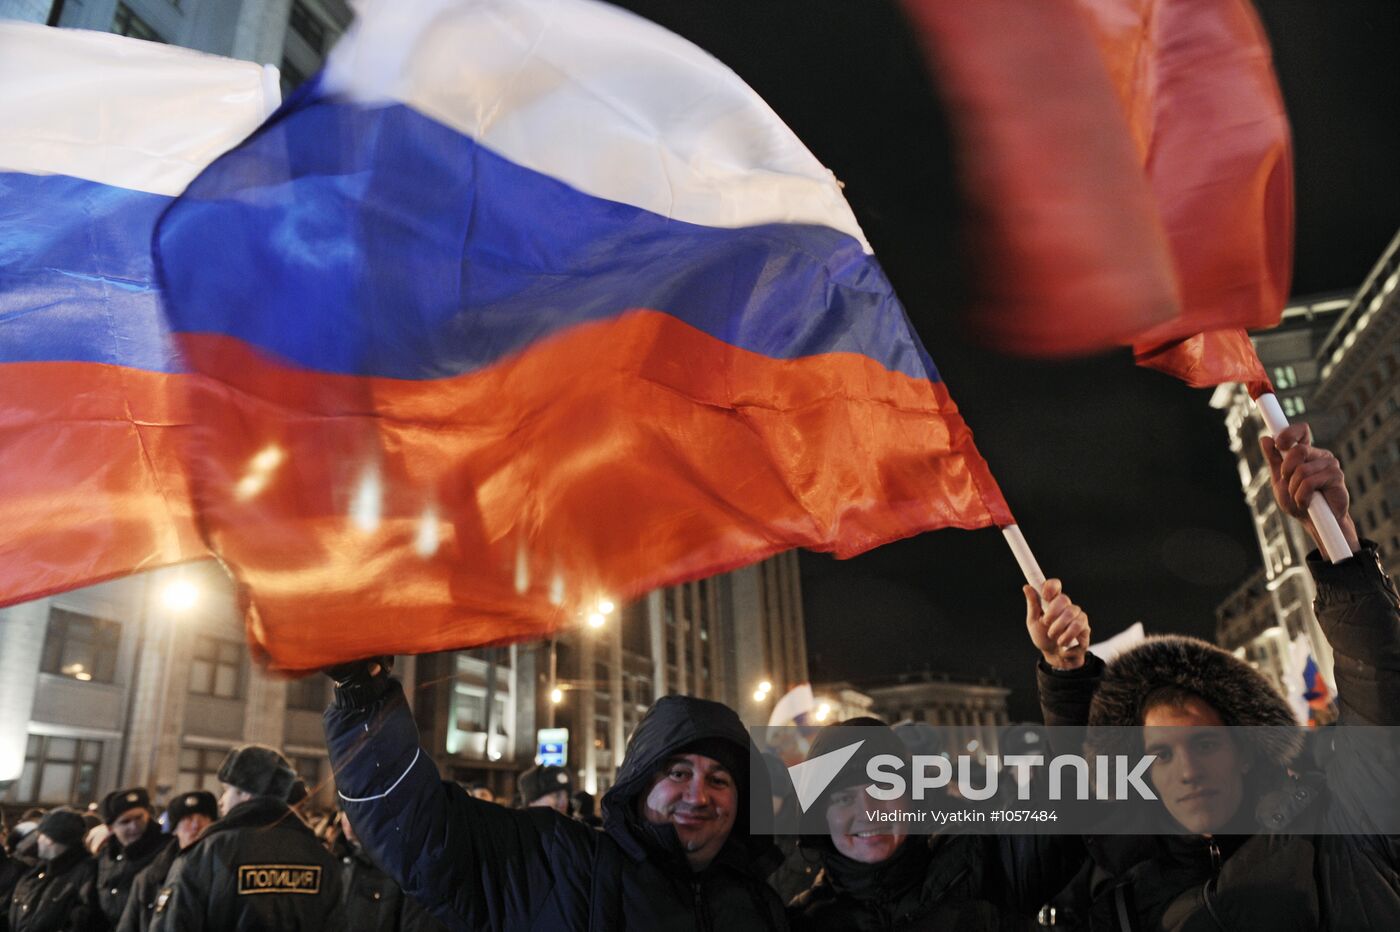 Vladimir Putin's supporters hold rally on Manezh Square